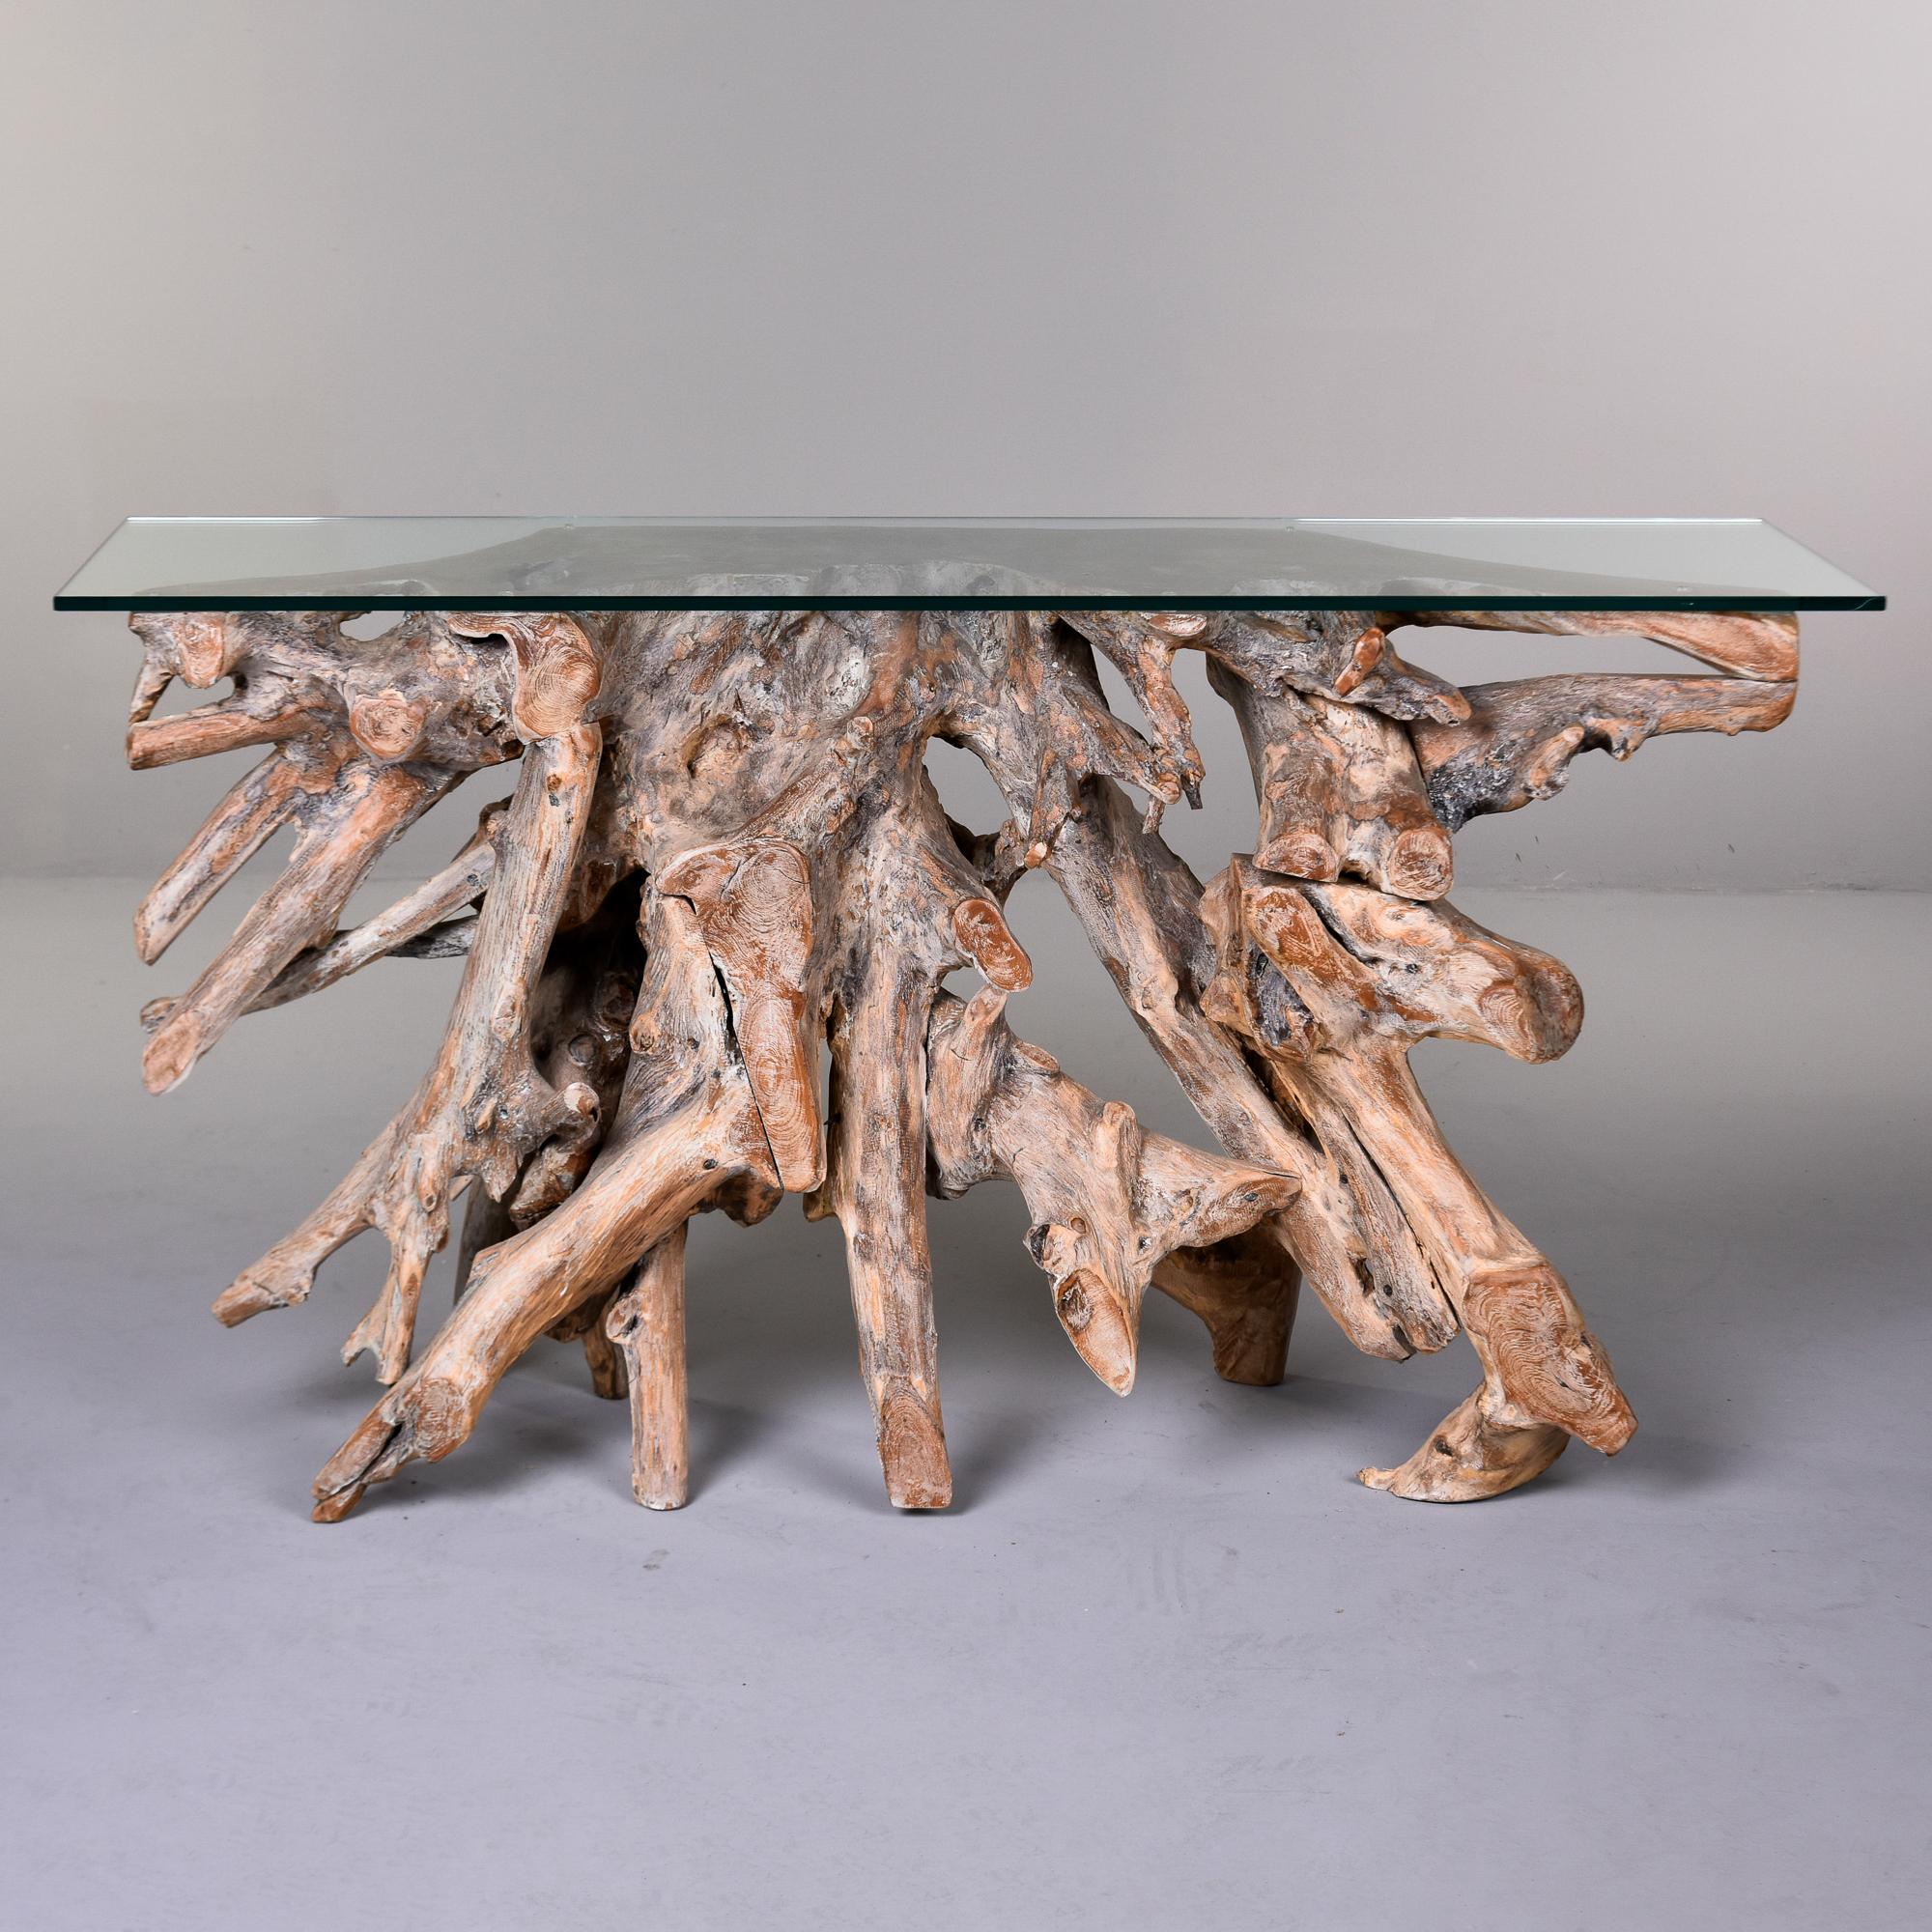 Console table with a base of a natural form mature teak wood root cluster. We believe the teak root was sourced in Asia. The teak roots have been lightened, planed, and sanded smooth by a US craftsman. The roots have been cut so that the base sits